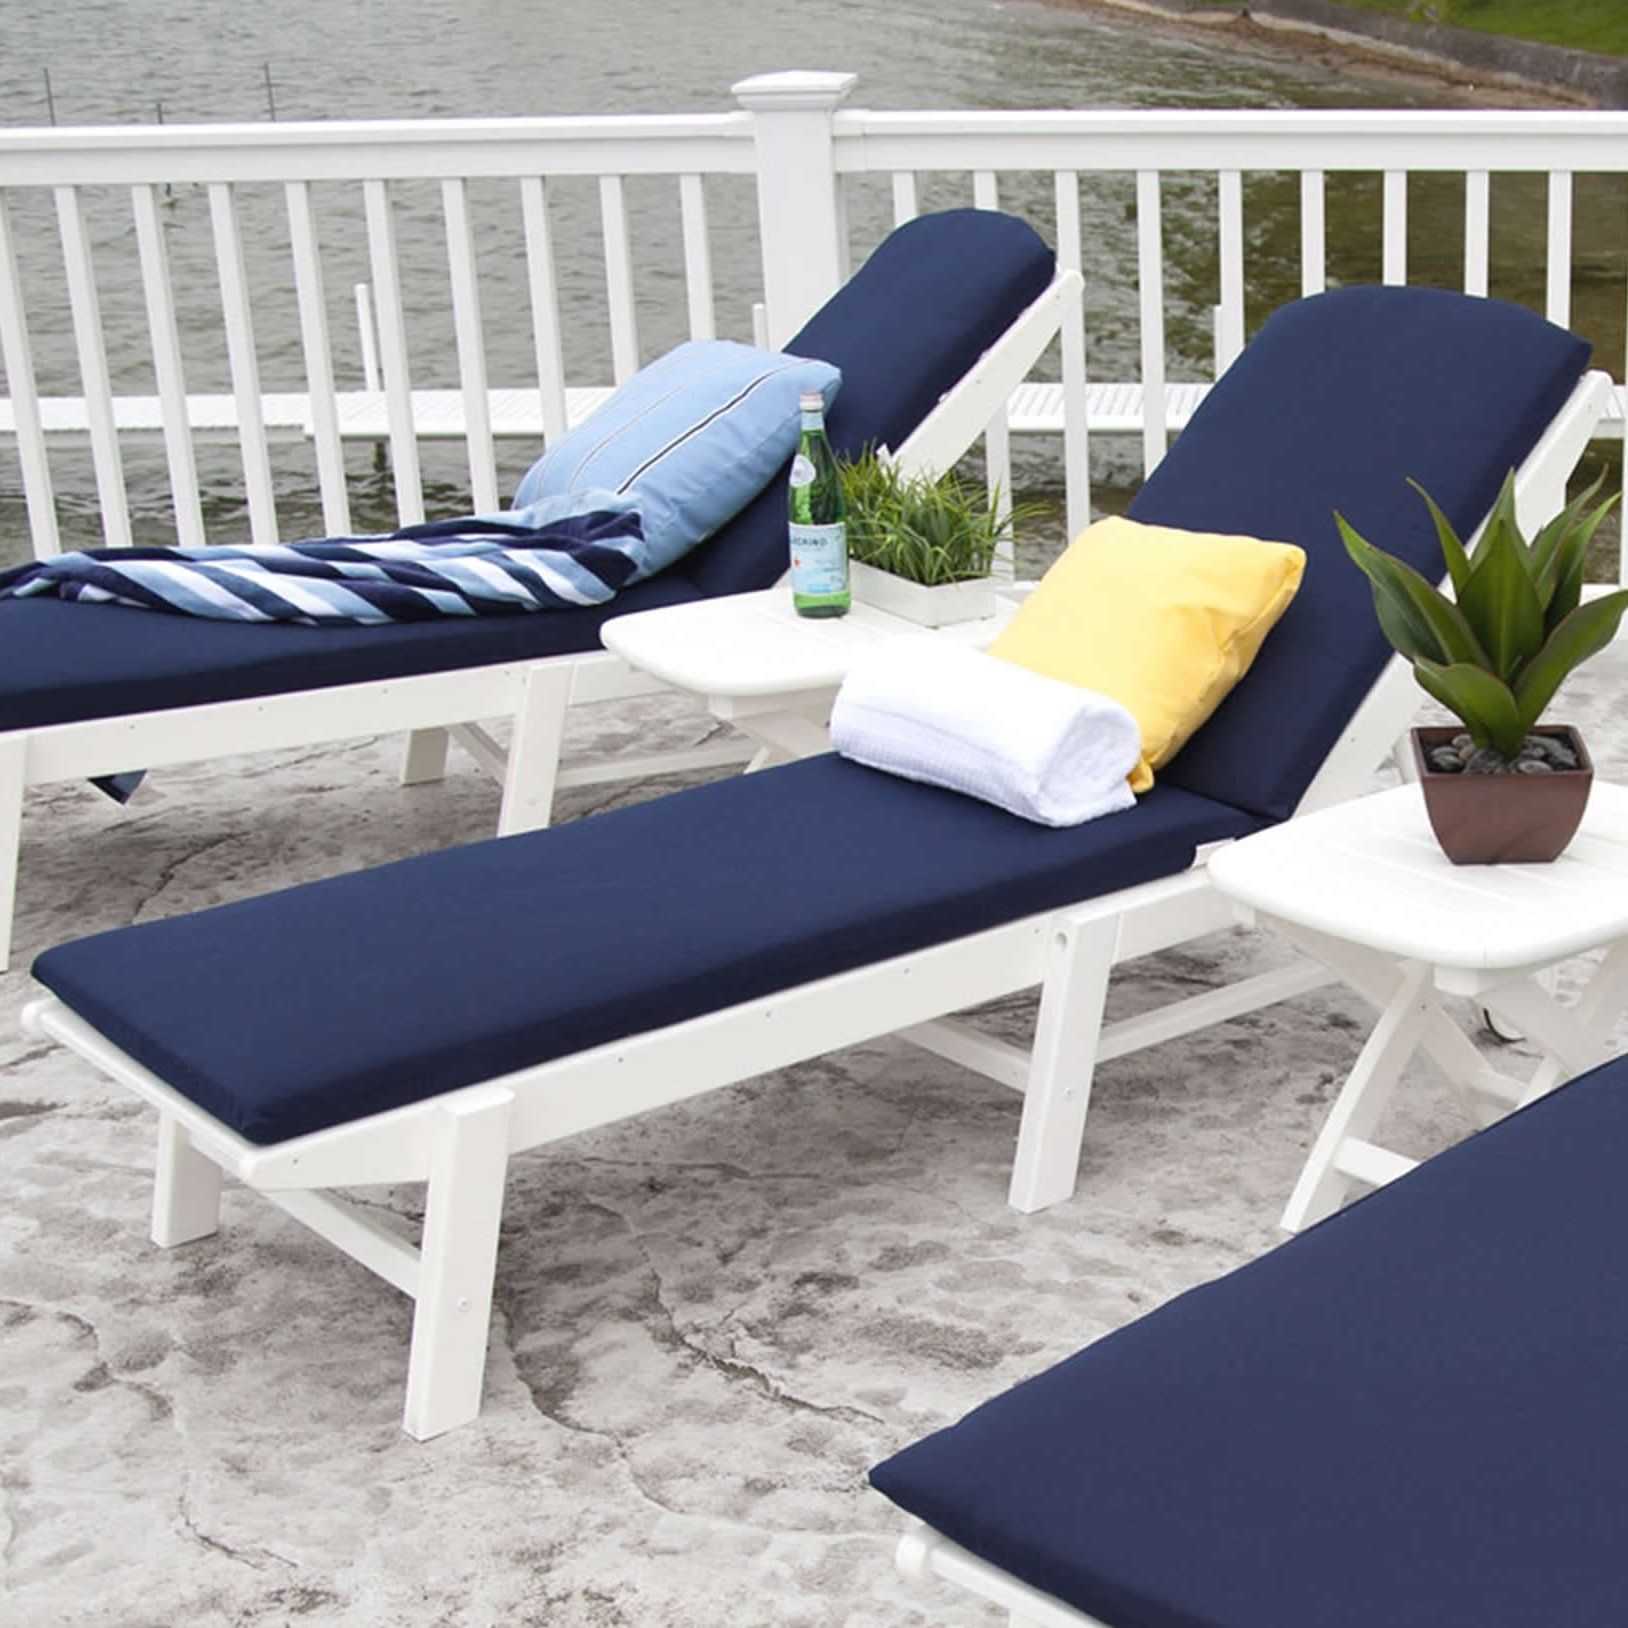 Well Liked Cushion Pads For Outdoor Chaise Lounge Chairs Pertaining To Polywood Outdoor Patio Chair Cushions – Patio Furniture Cushions (View 11 of 15)